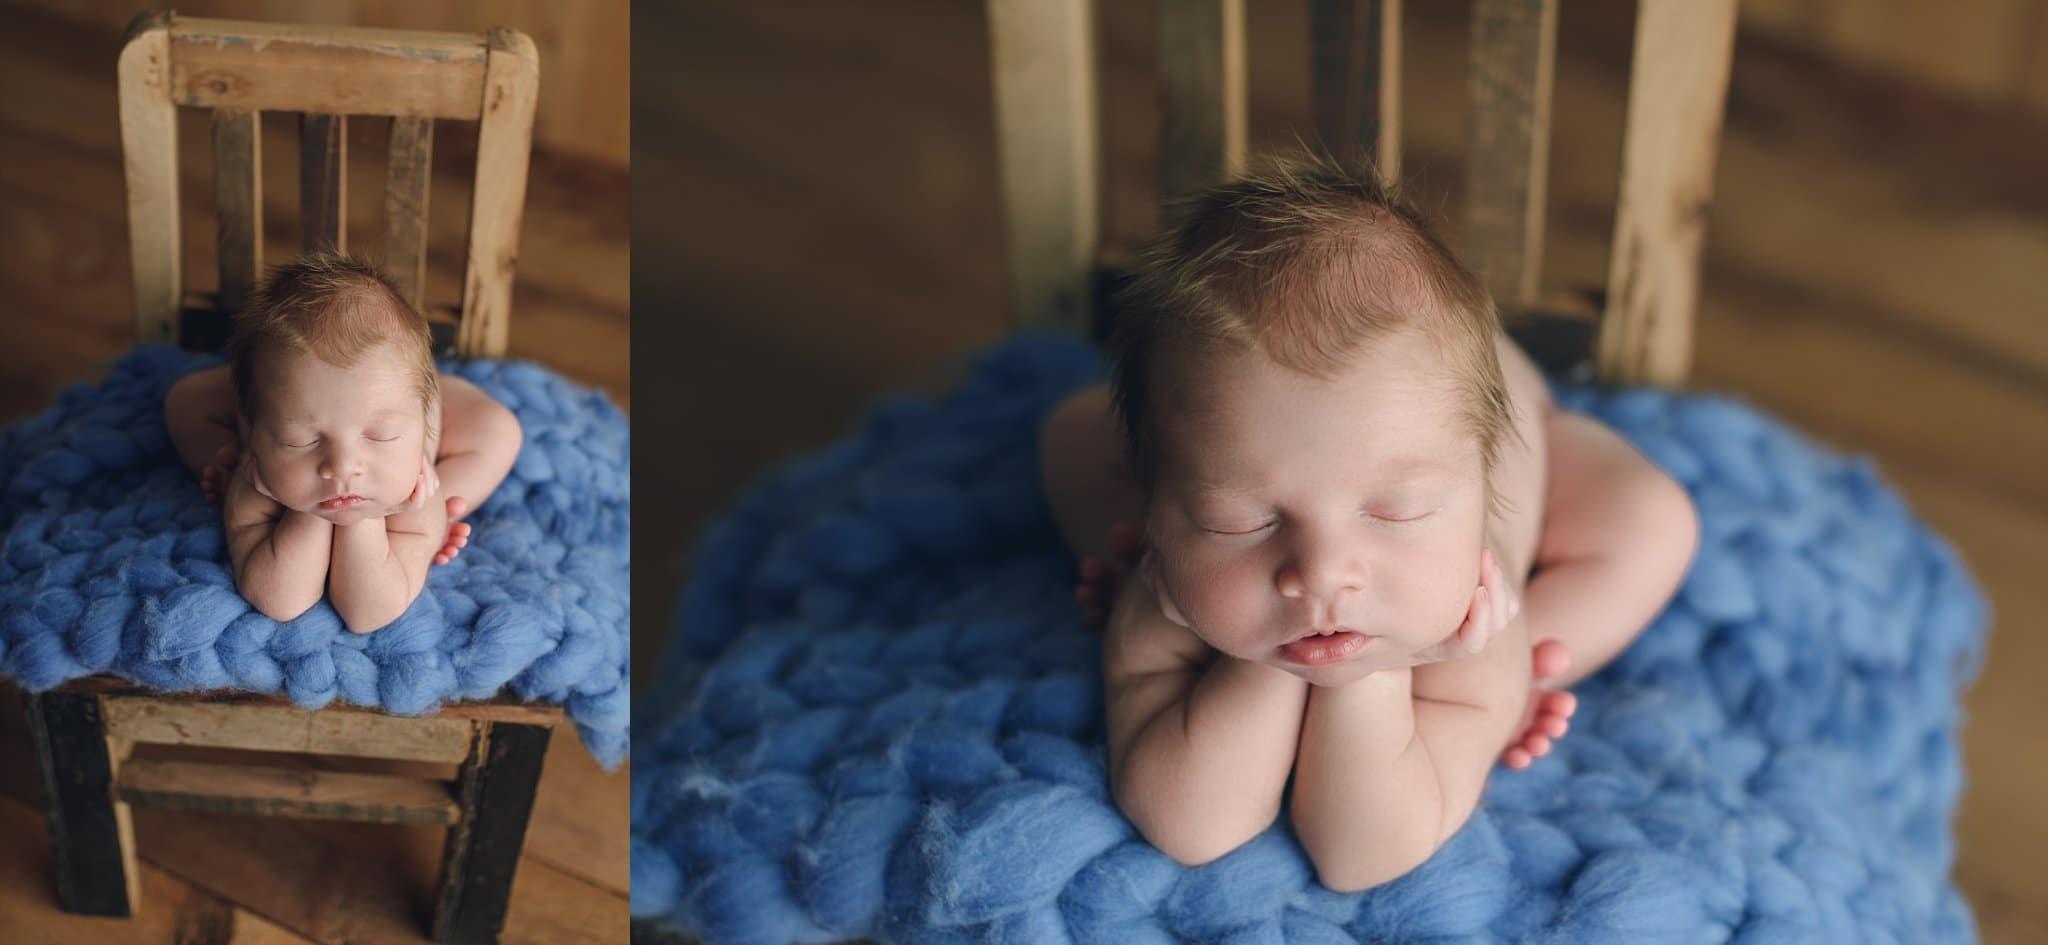 St Johns County Newborn Photographer baby boy with fuzzy hair froggy pose on blue balnket on rustic chair